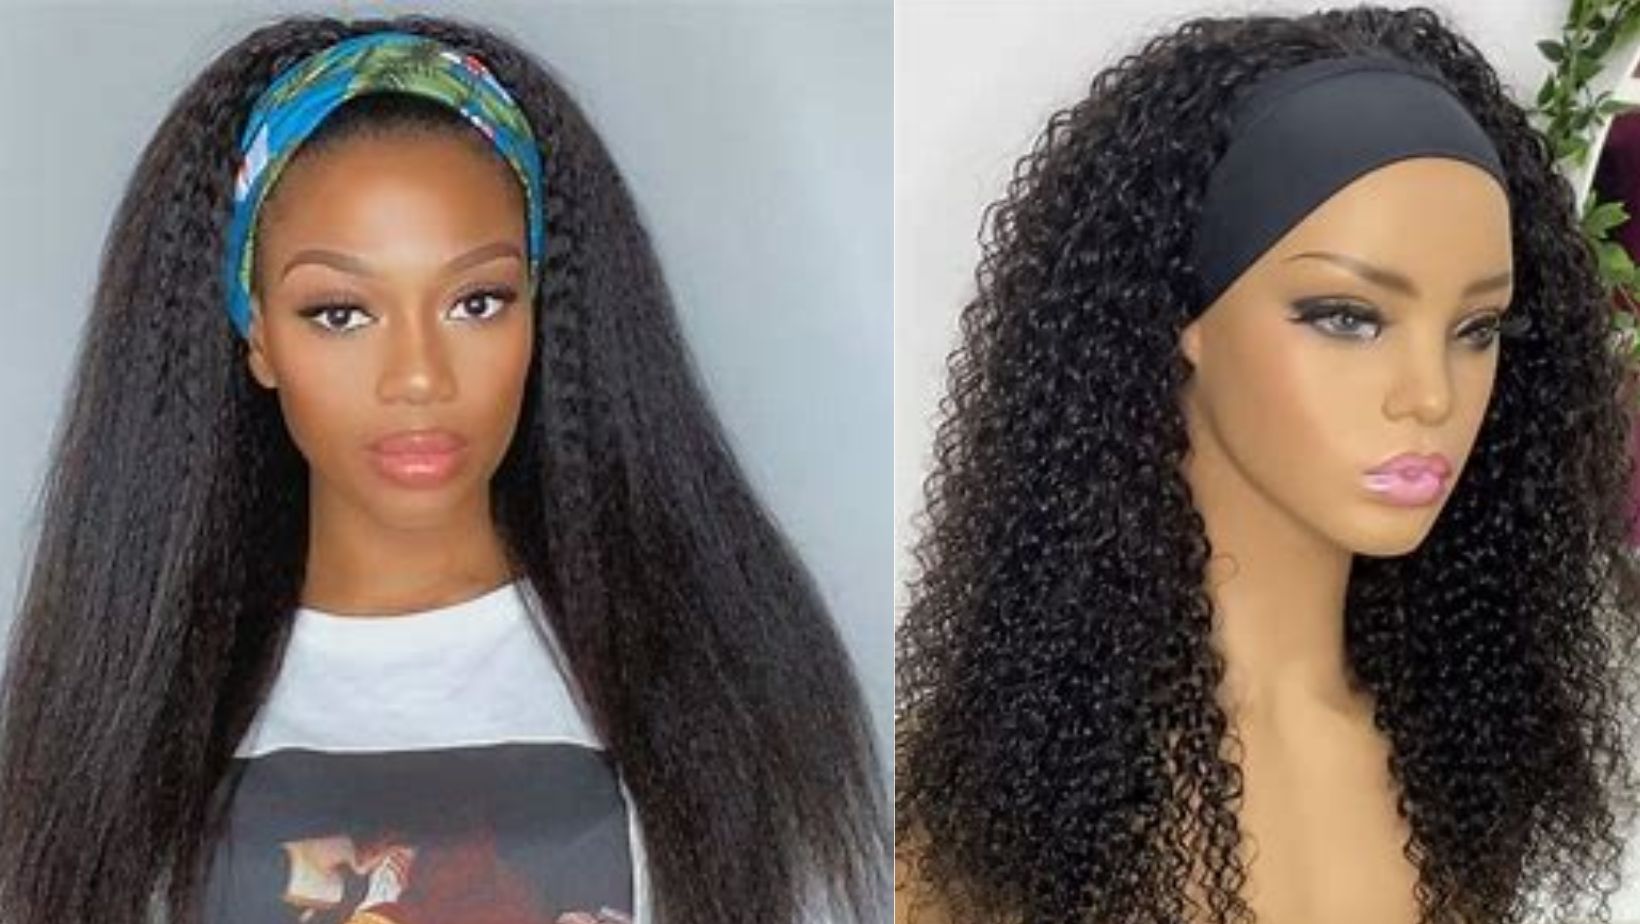 Different Types of Headband Wigs